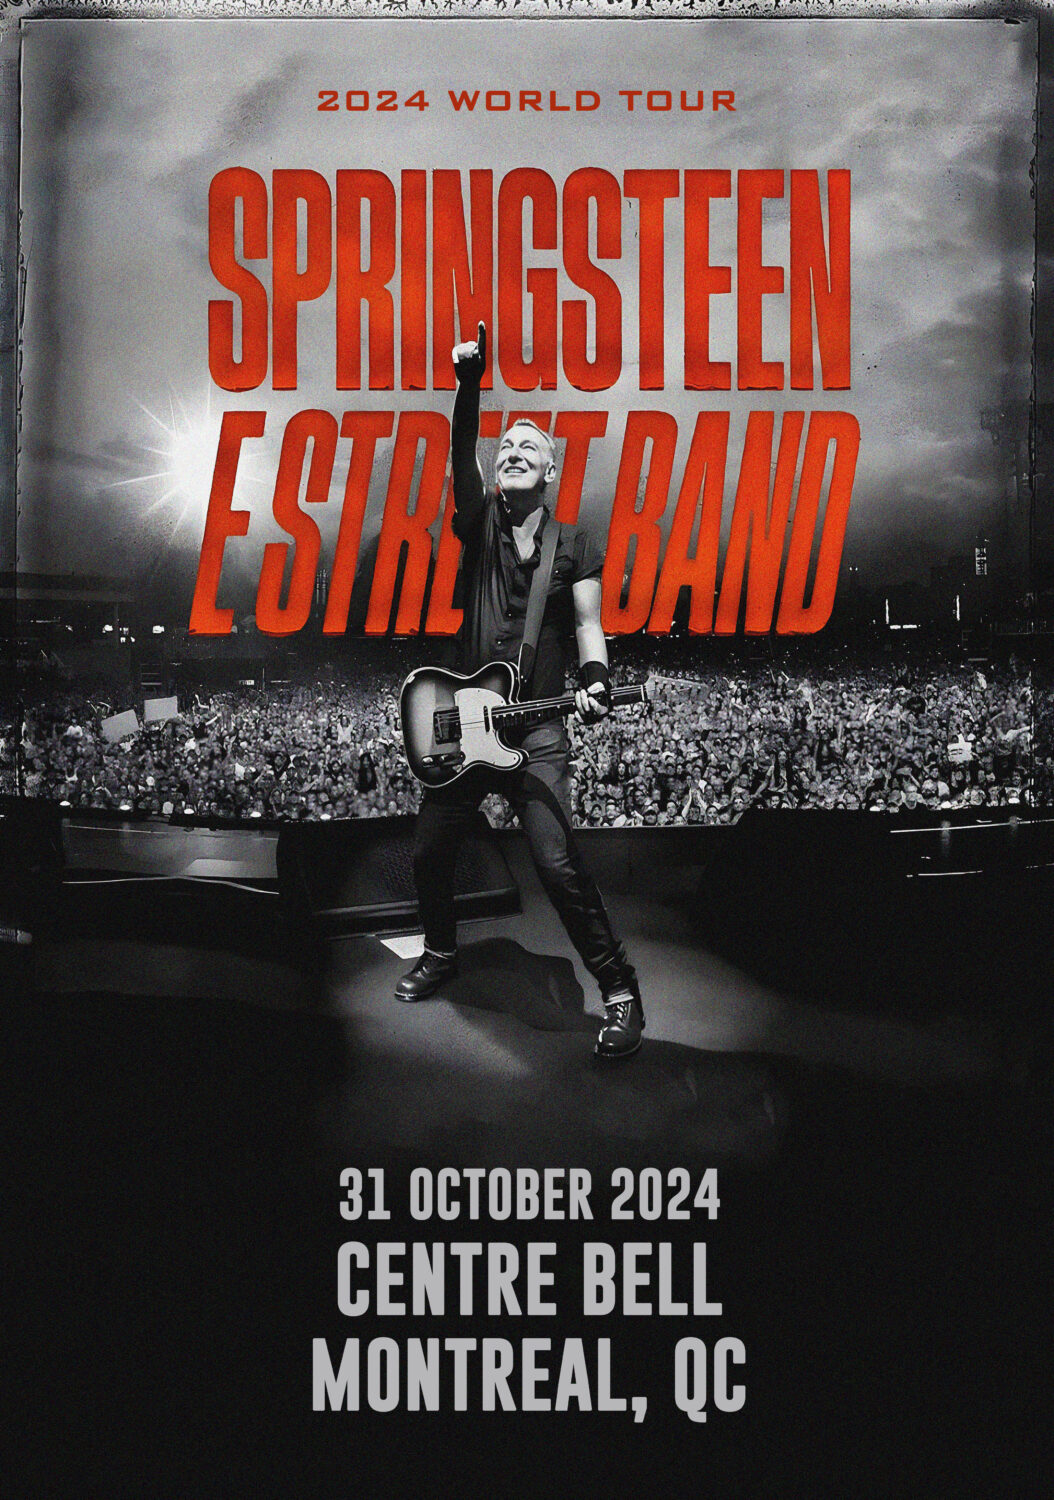 BRUCE SPRINGSTEEN 2024 World Tour MONTREAL Poster